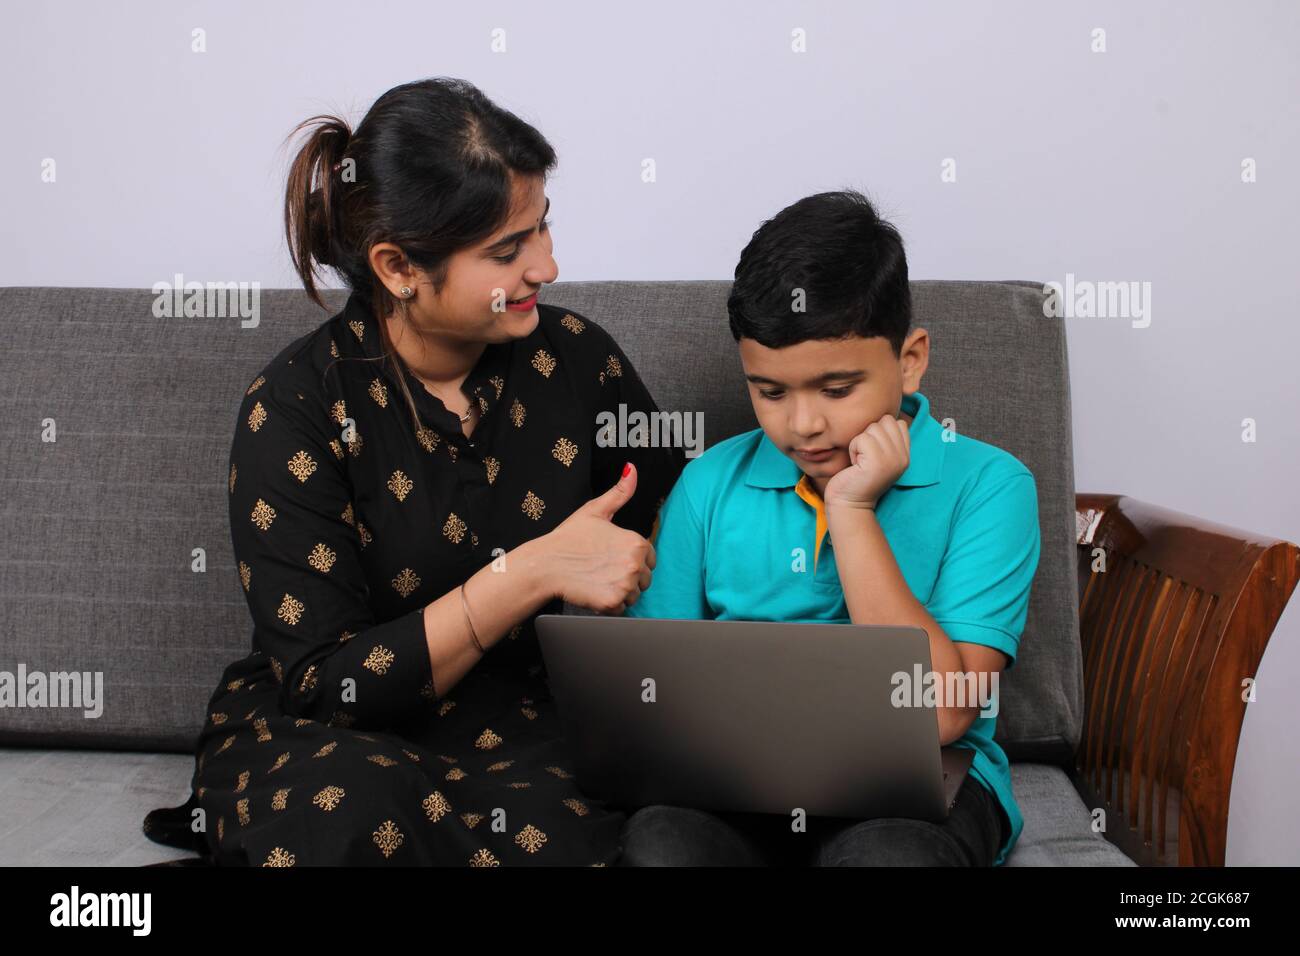 Coronavirus Outbreak and education concept - Lockdown and school closures. Indian Mother helping son studying online classes at home. COVID-19 Stock Photo